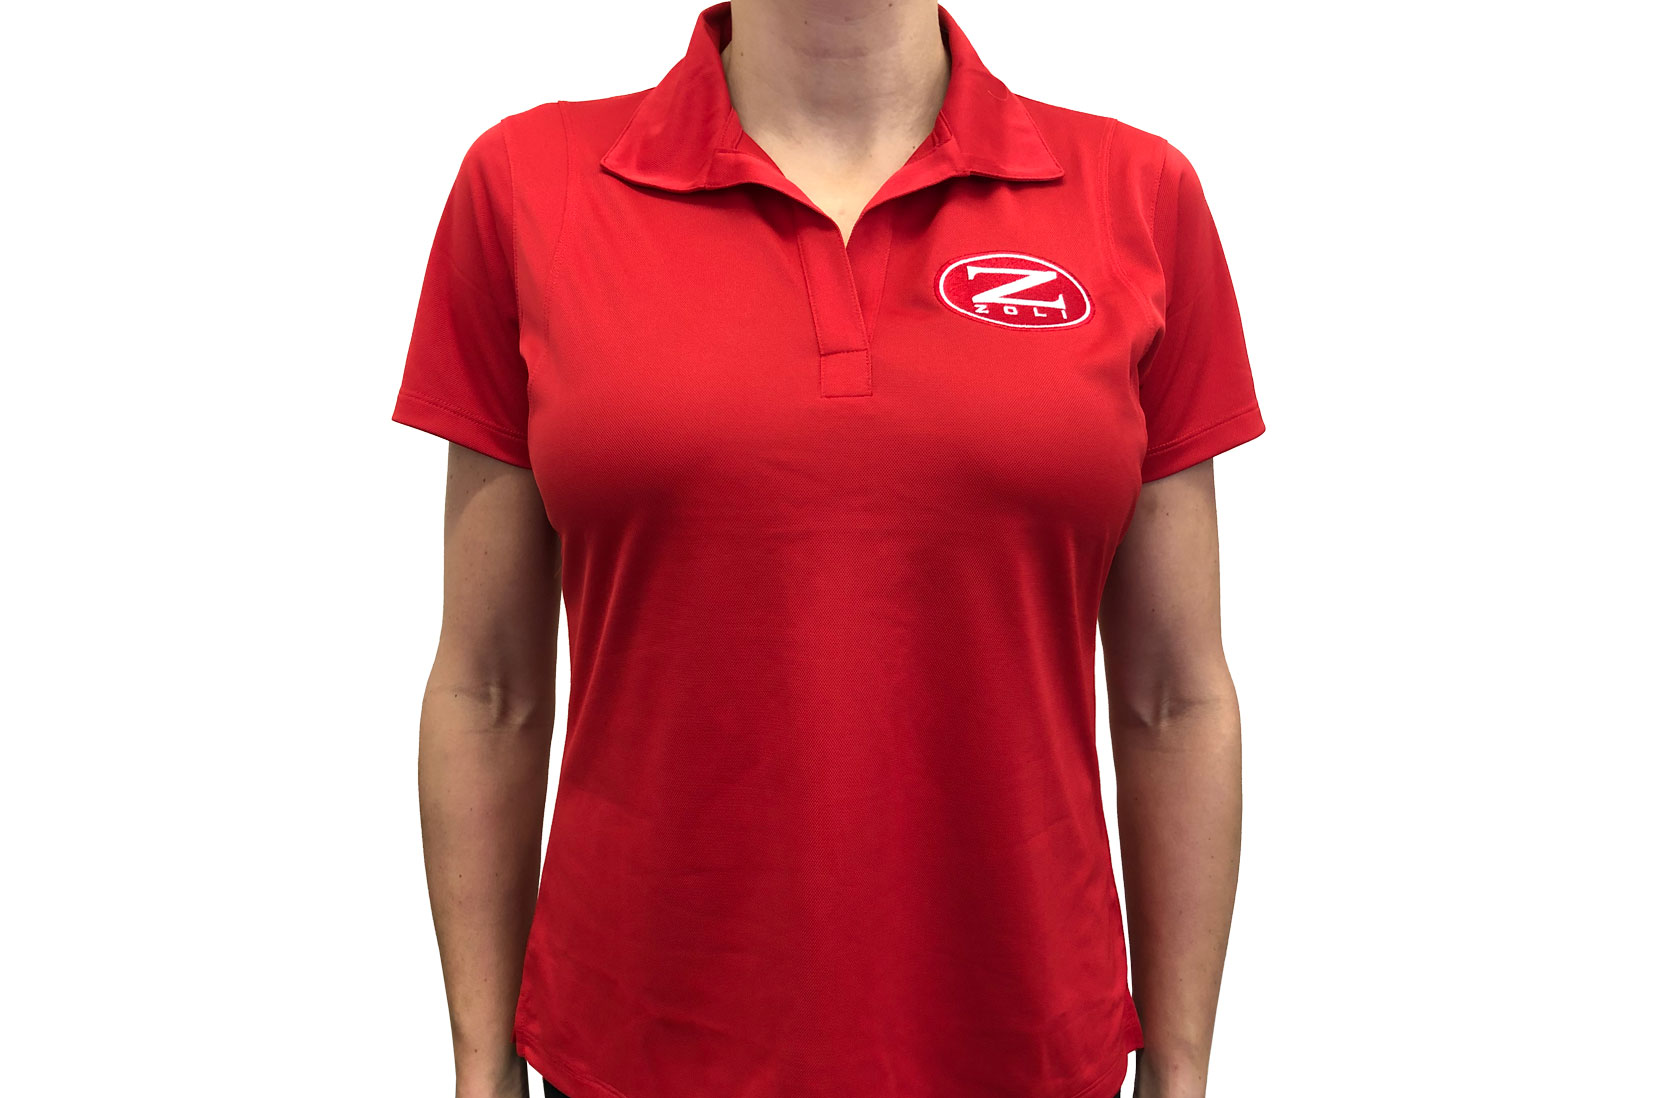 Zoli Women’s Embroidered Polo Shirt ( Red )